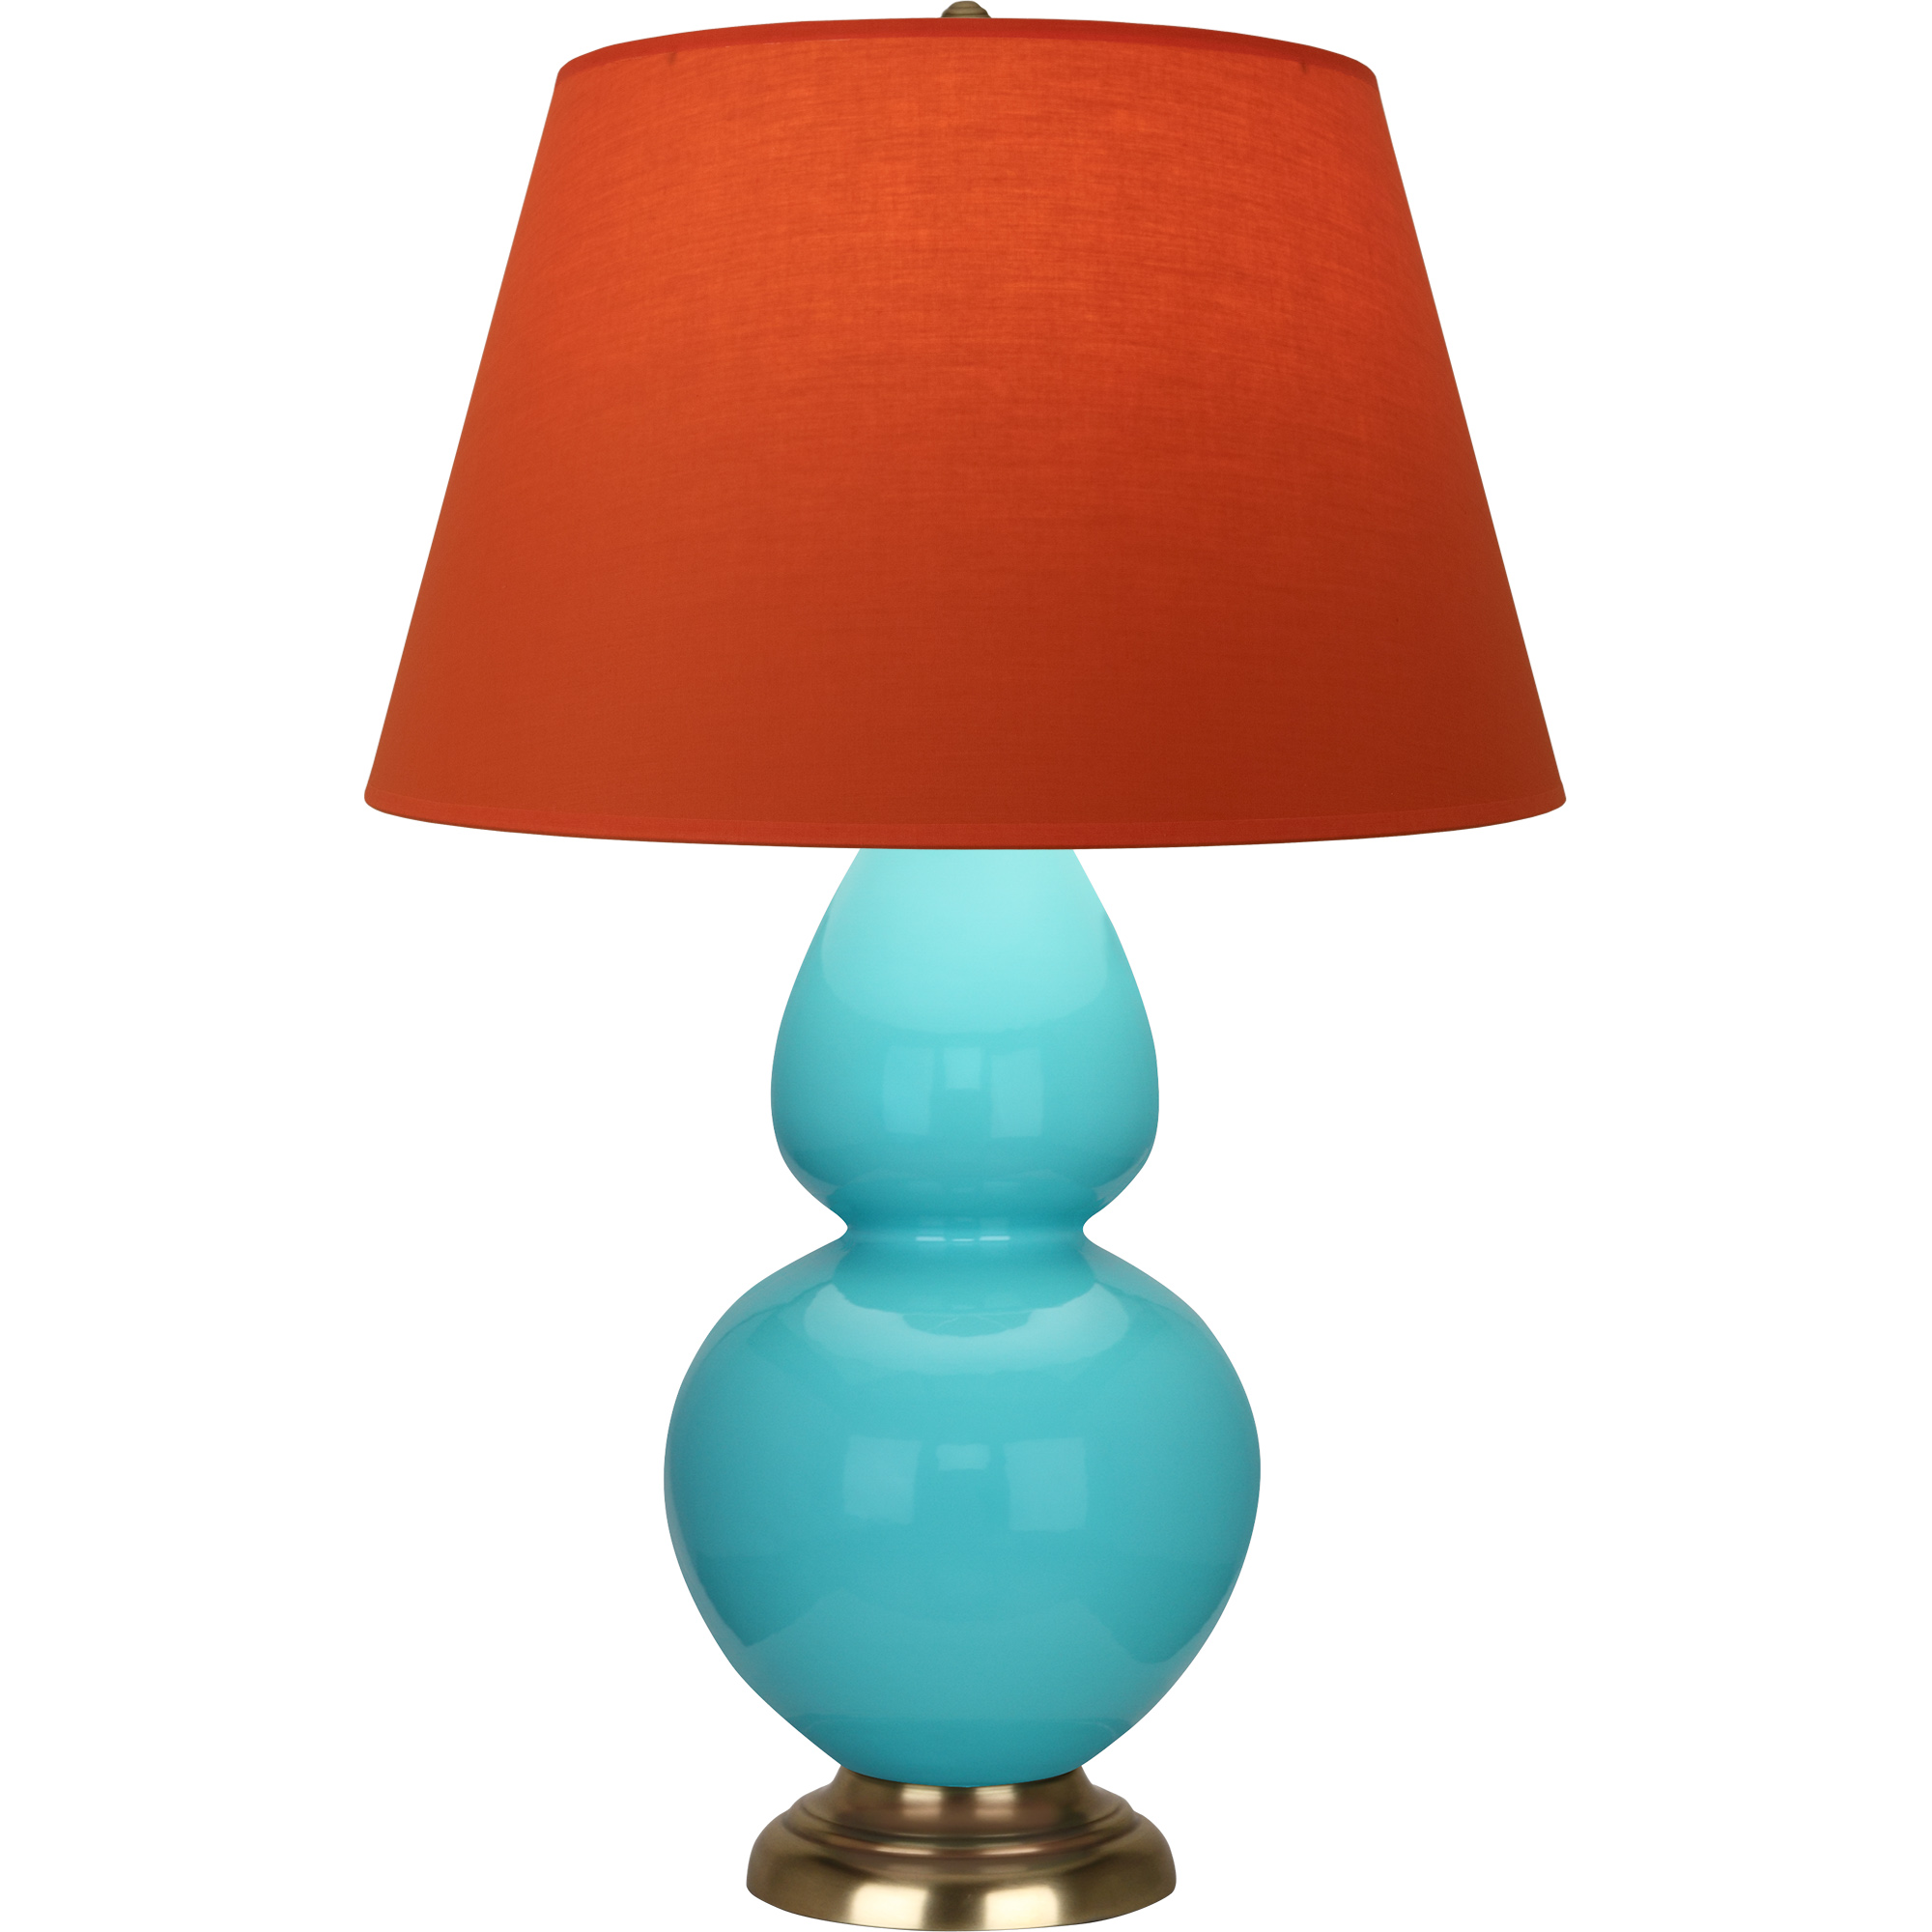 Double Gourd Table Lamp Style #1740T